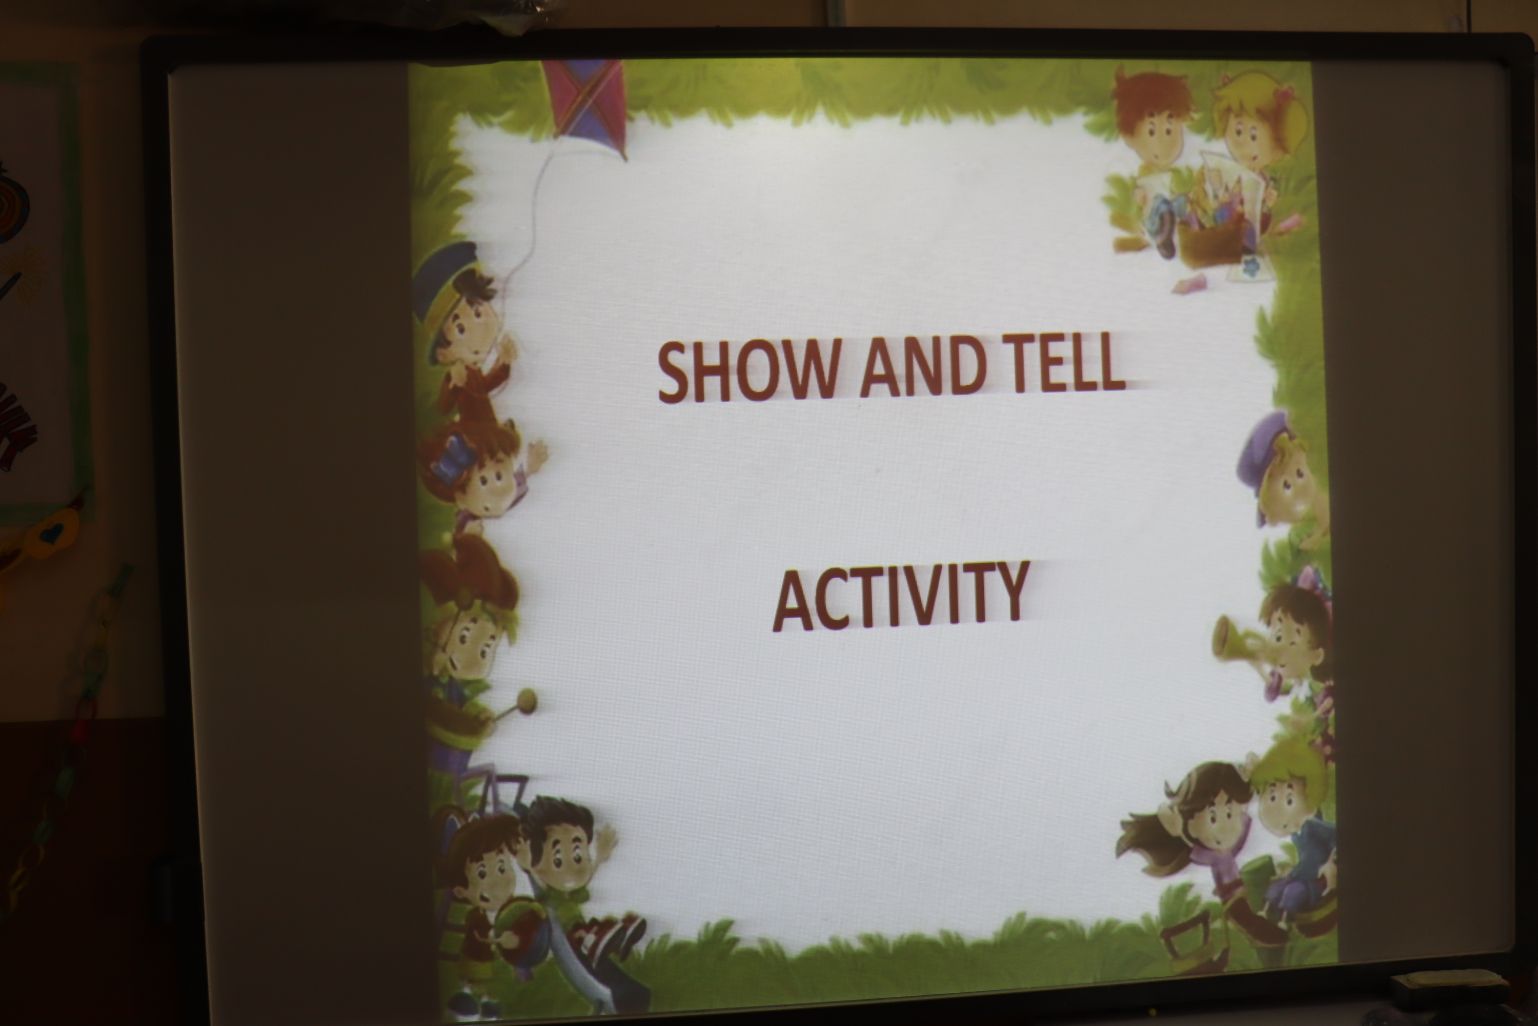 'Show and tell activity'